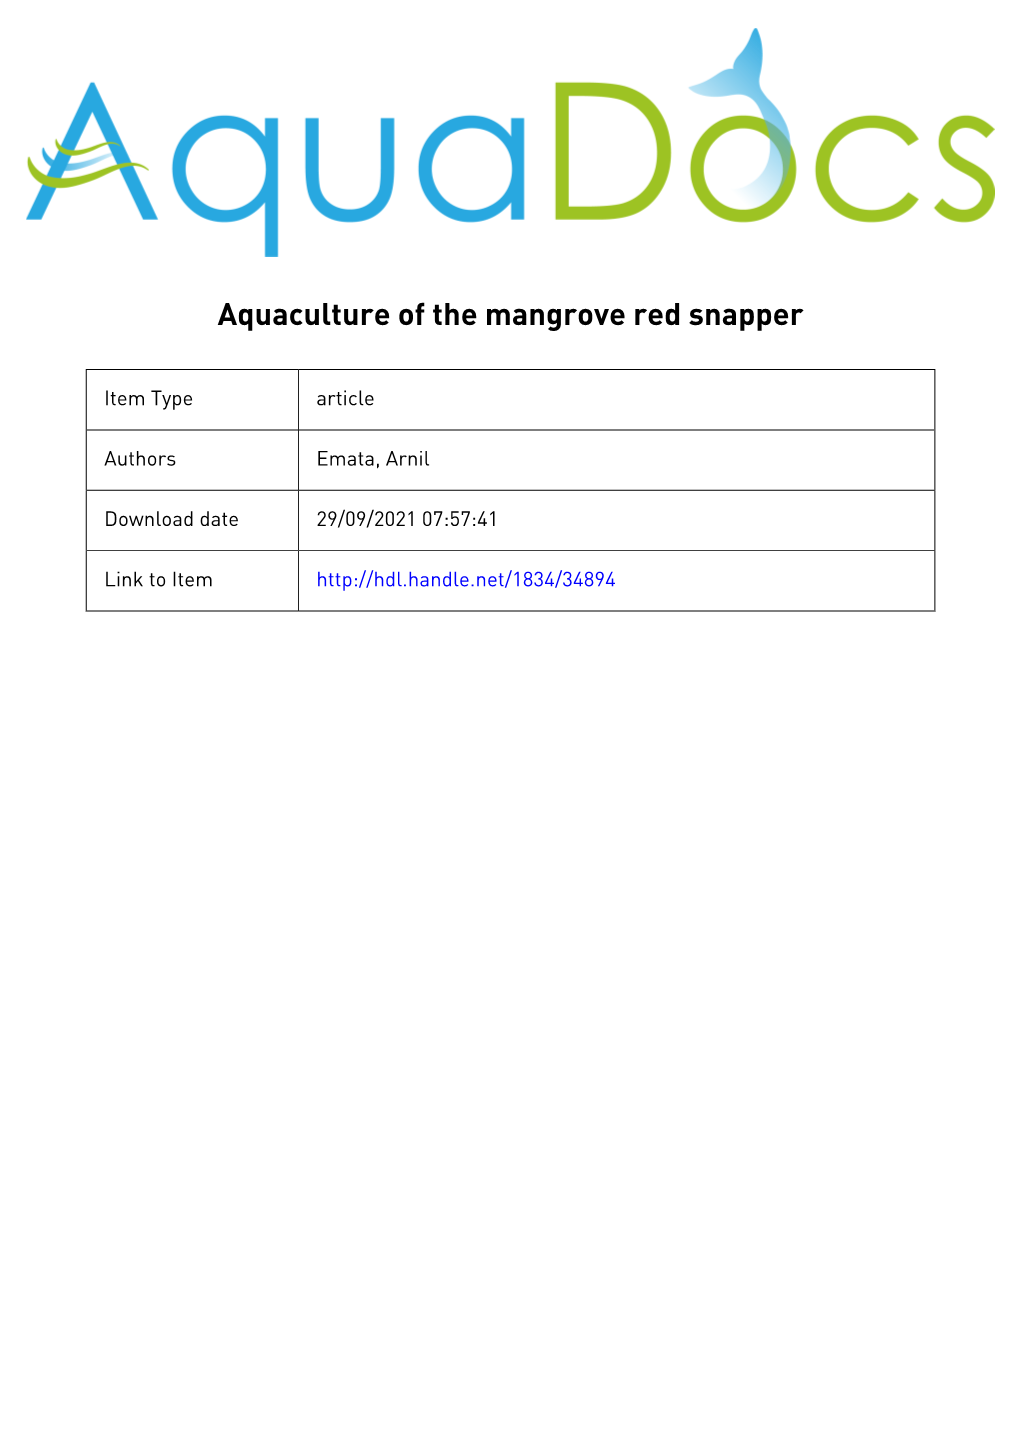 Aquaculture of the Mangrove Red Snapper